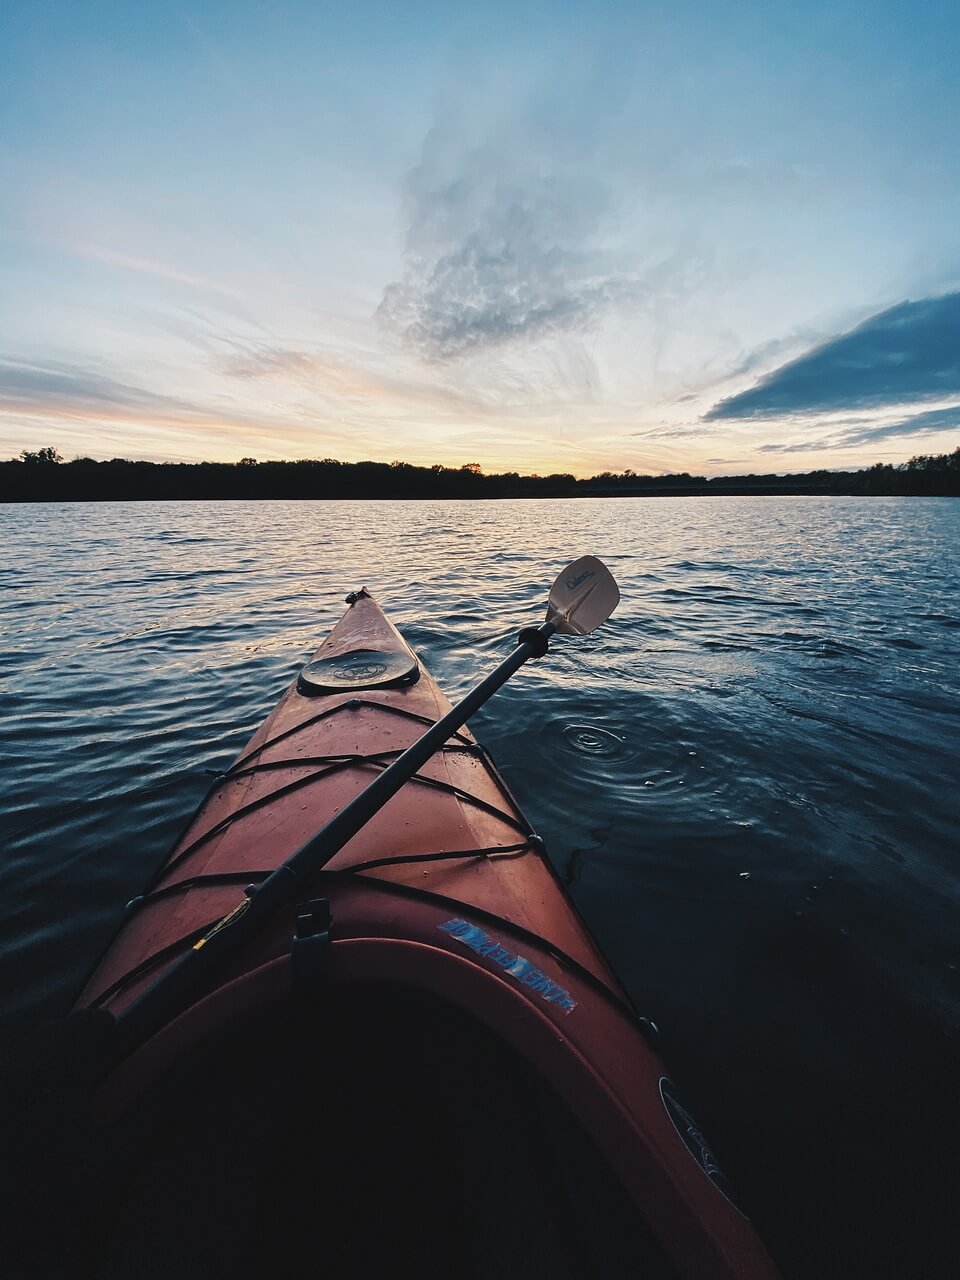 Packing Suggestions for Your First Kayaking Trip